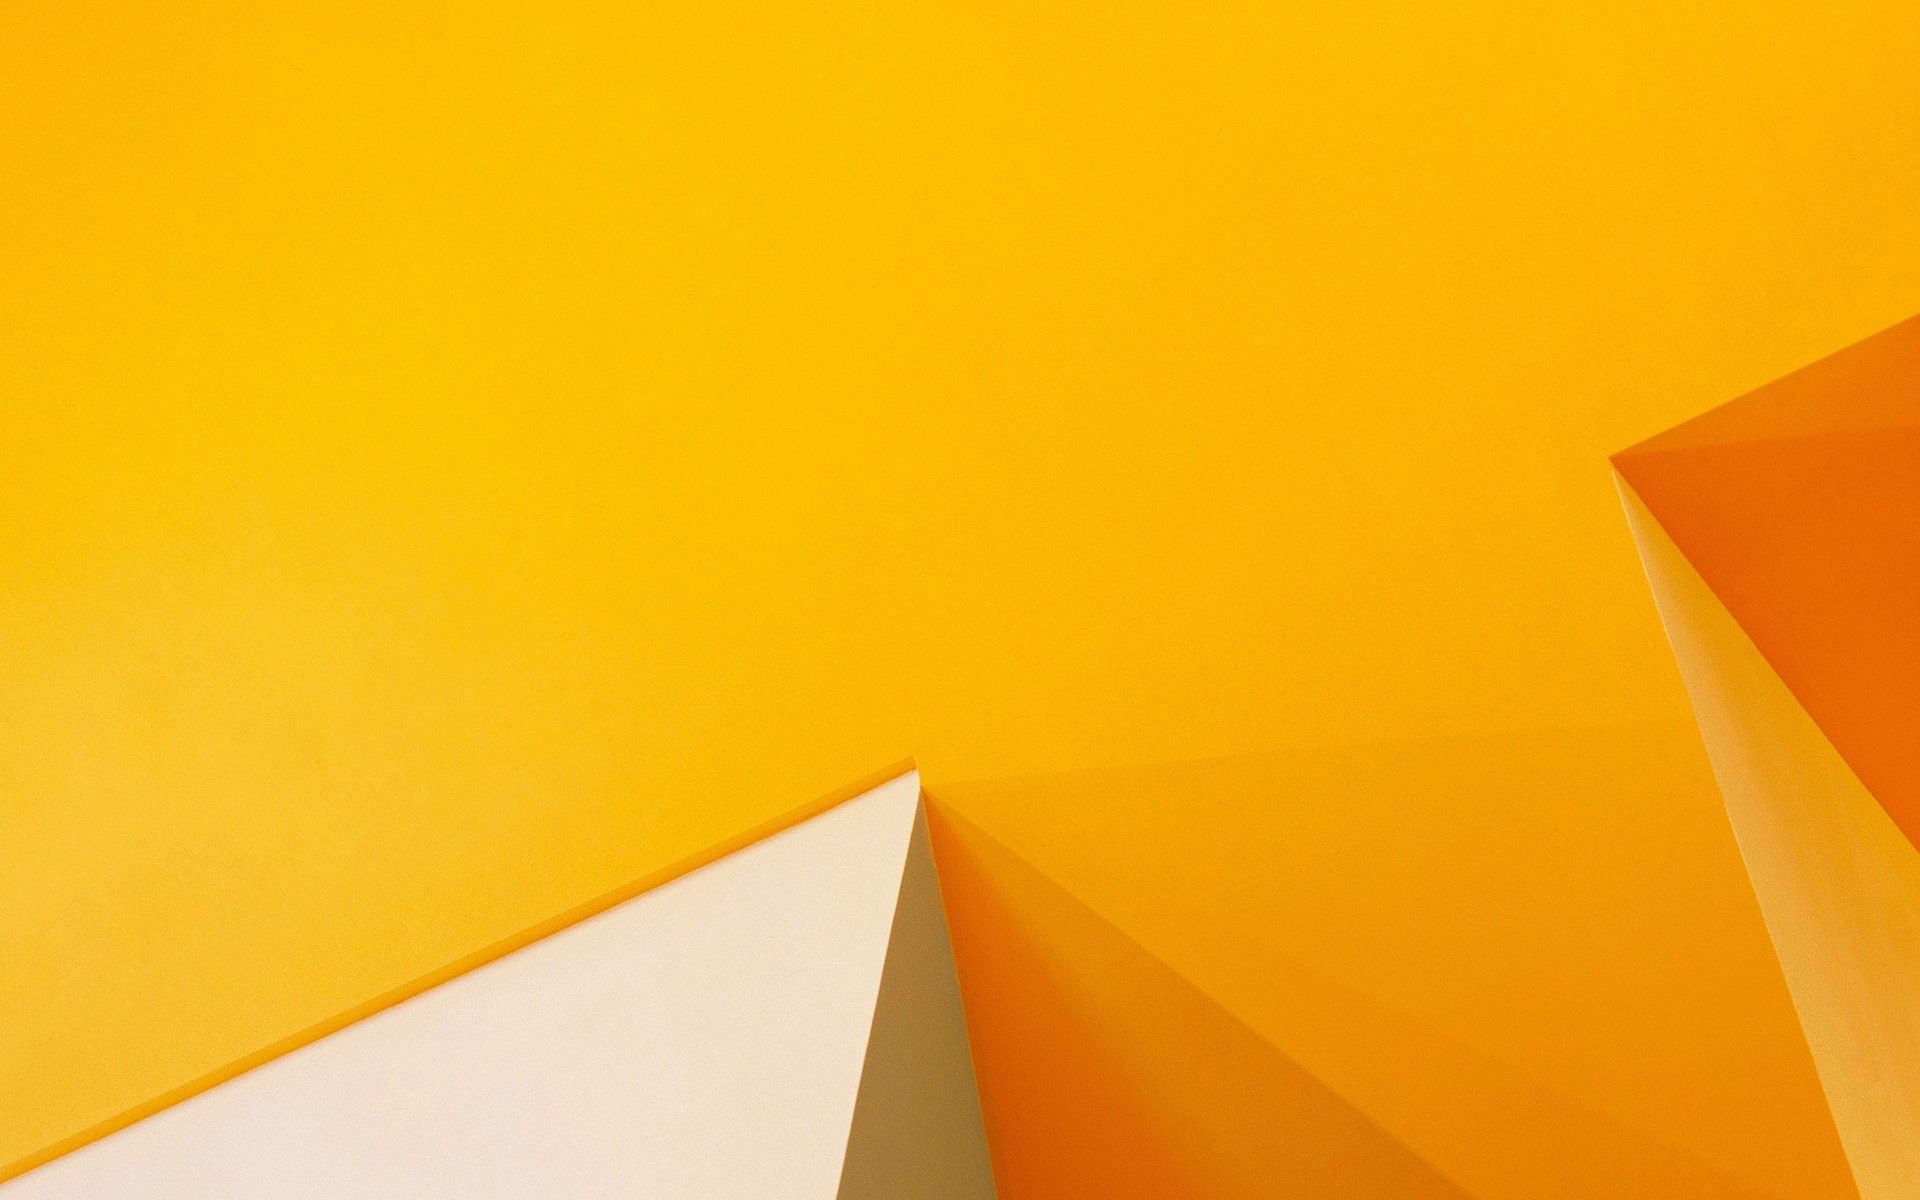 On Orange Surface HD Wallpaper Triangles